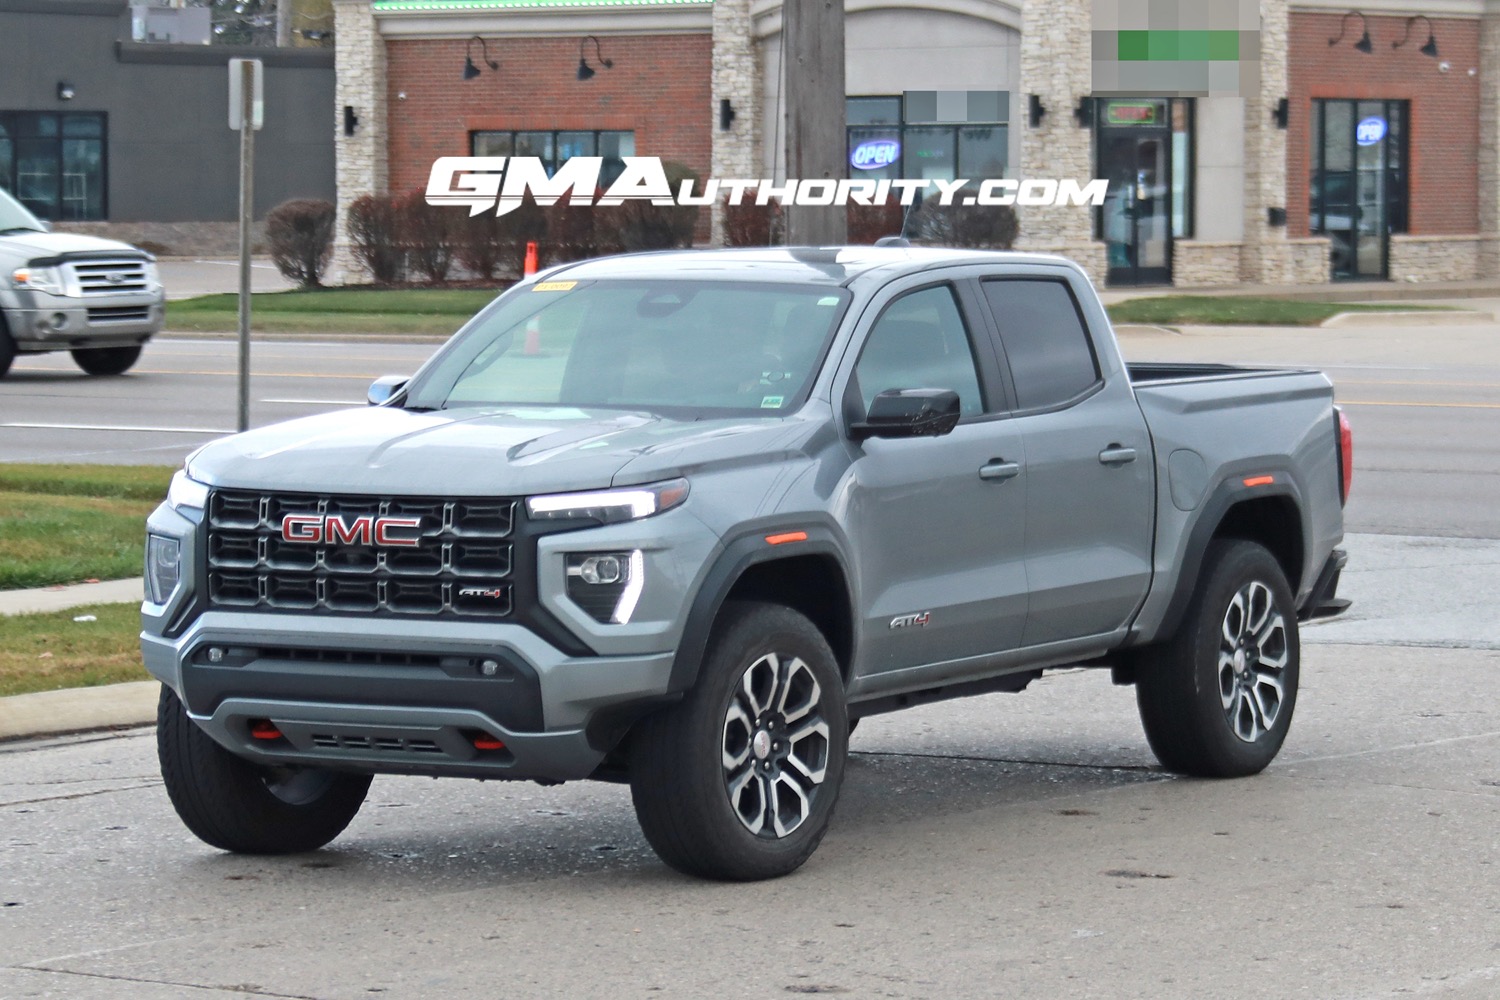 2023-gmc-canyon-at4-sterling-metallic-gxd-20-inch-wheels-rd5-real-world-photos-exterior3-chevrolet-colorado-trail-boss-sterling-gray-metallic-gxd-first-real-world-photos-exterior-002